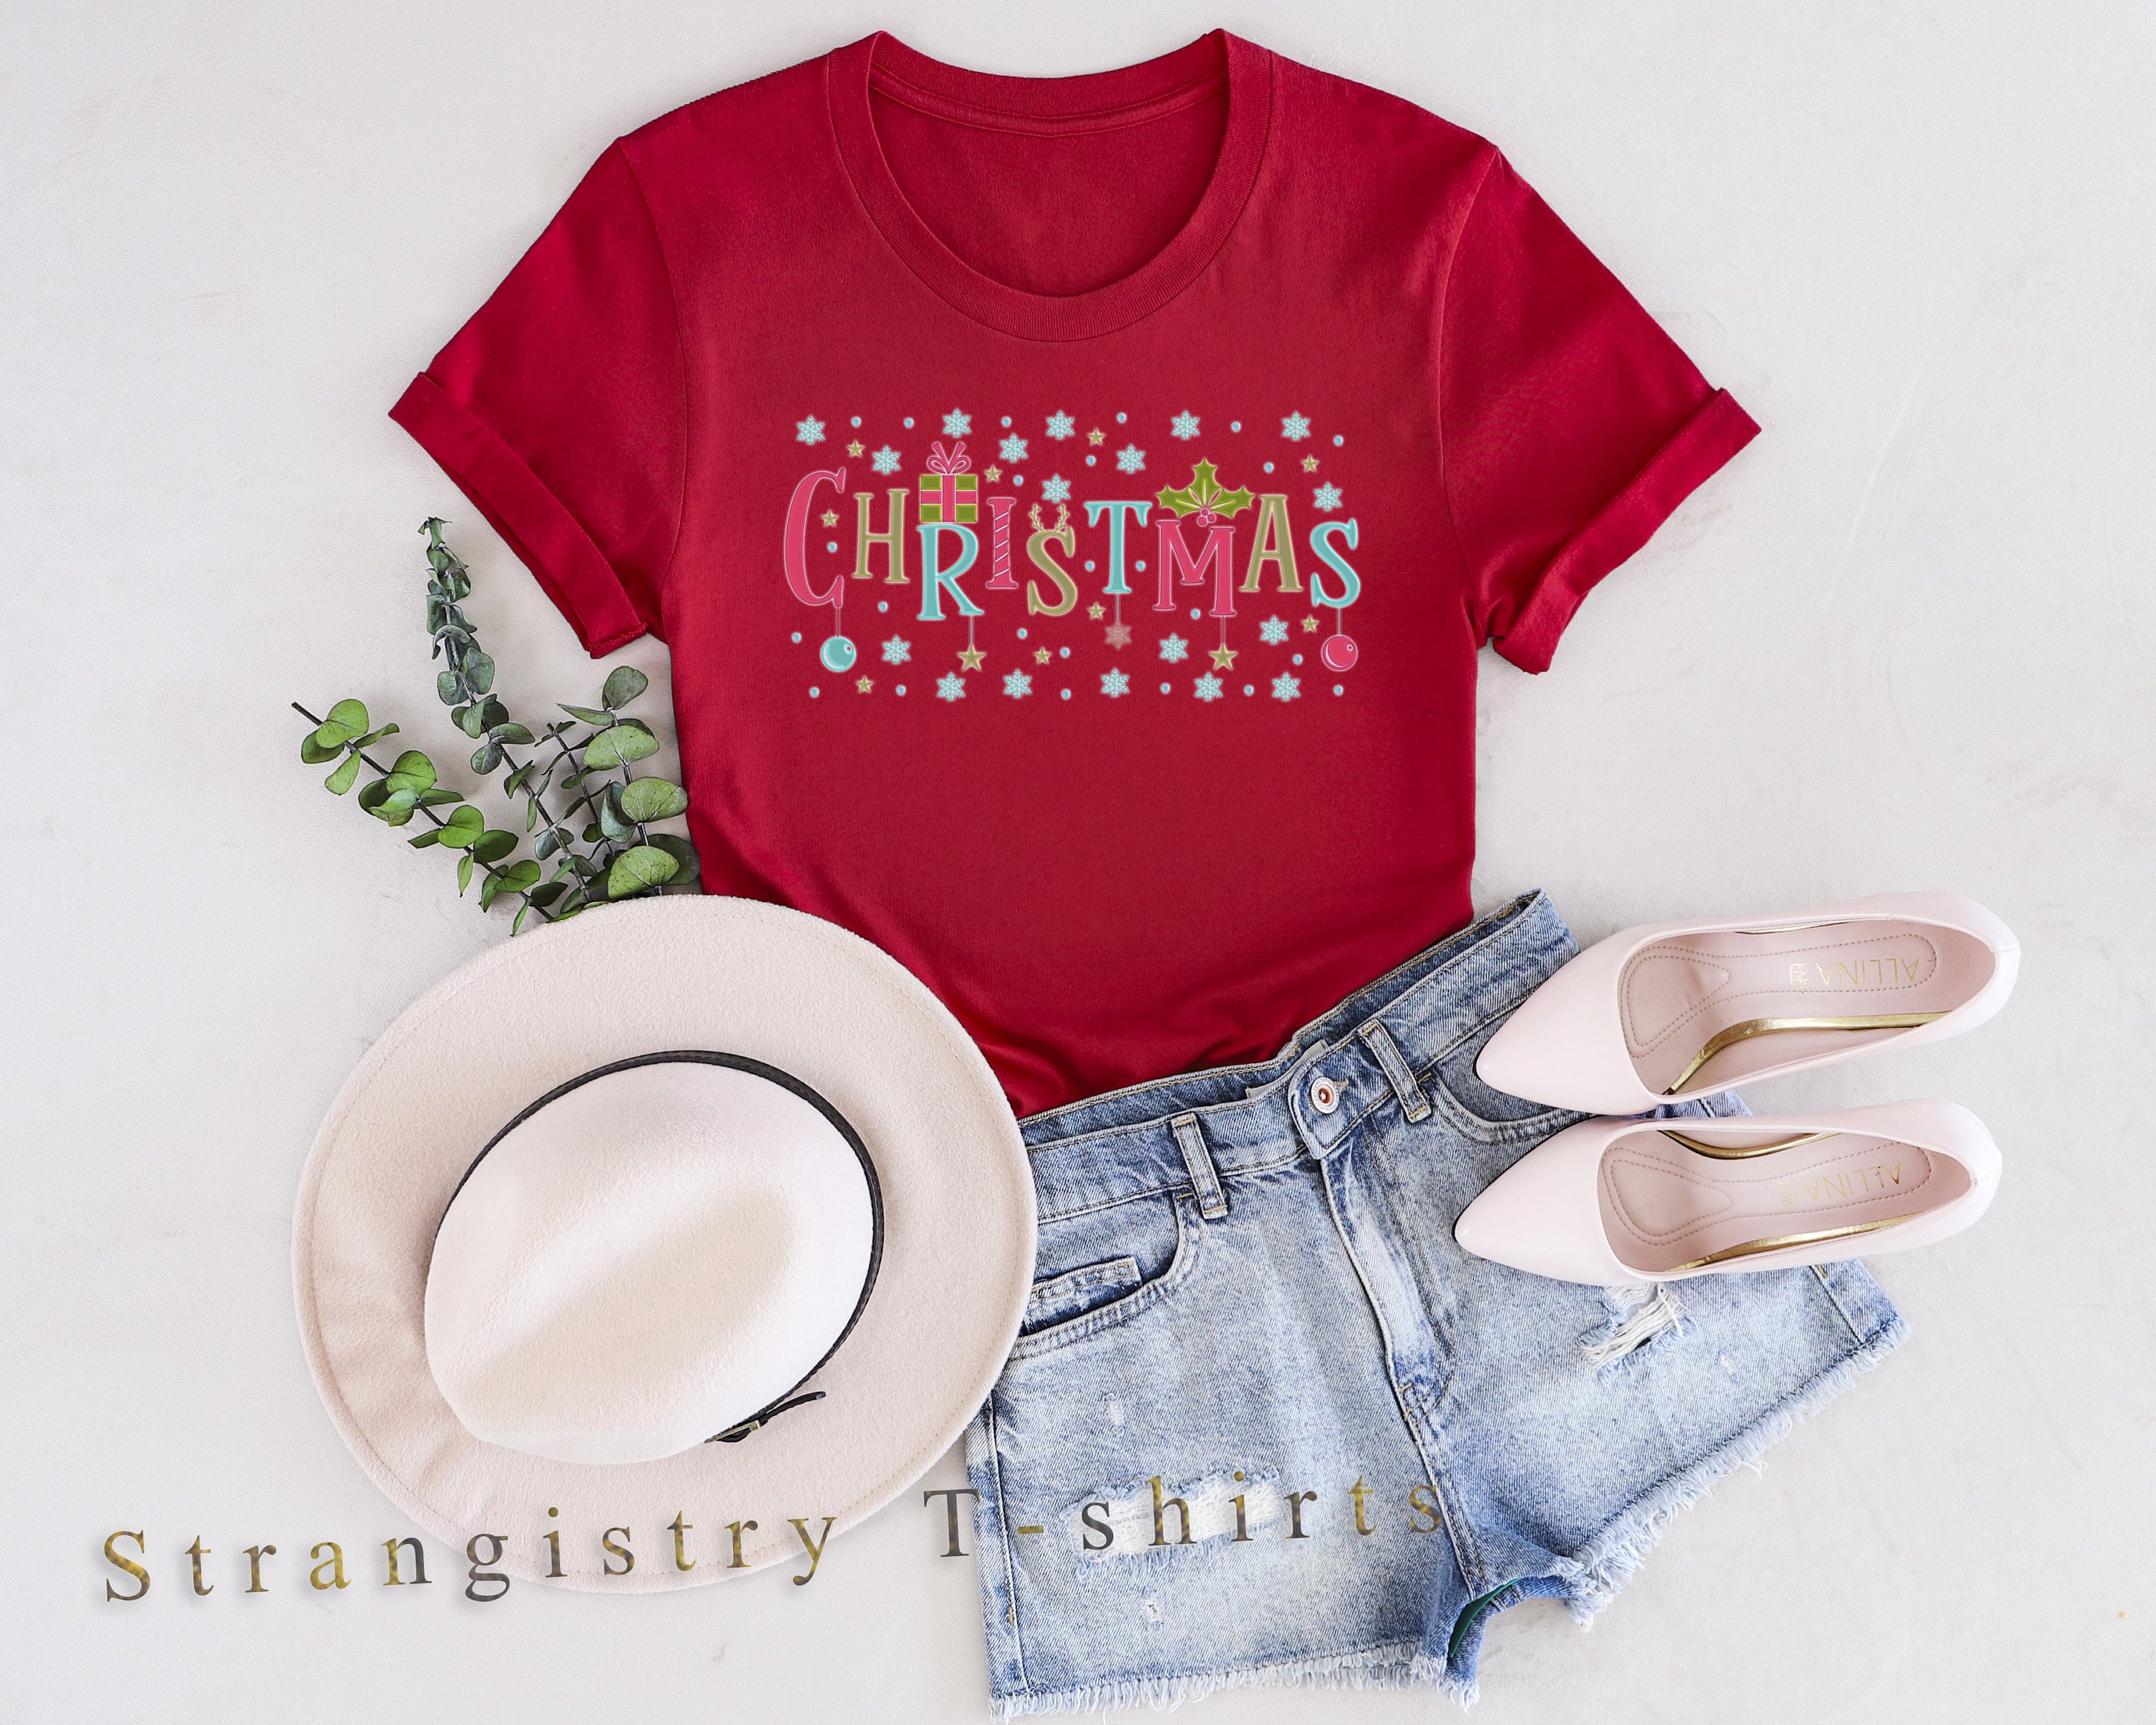 Christmas T-shirt with the Text of Christmas, Christian T-shirt for Christmas, Christmas Gift for Family, Friends and Loved Ones.